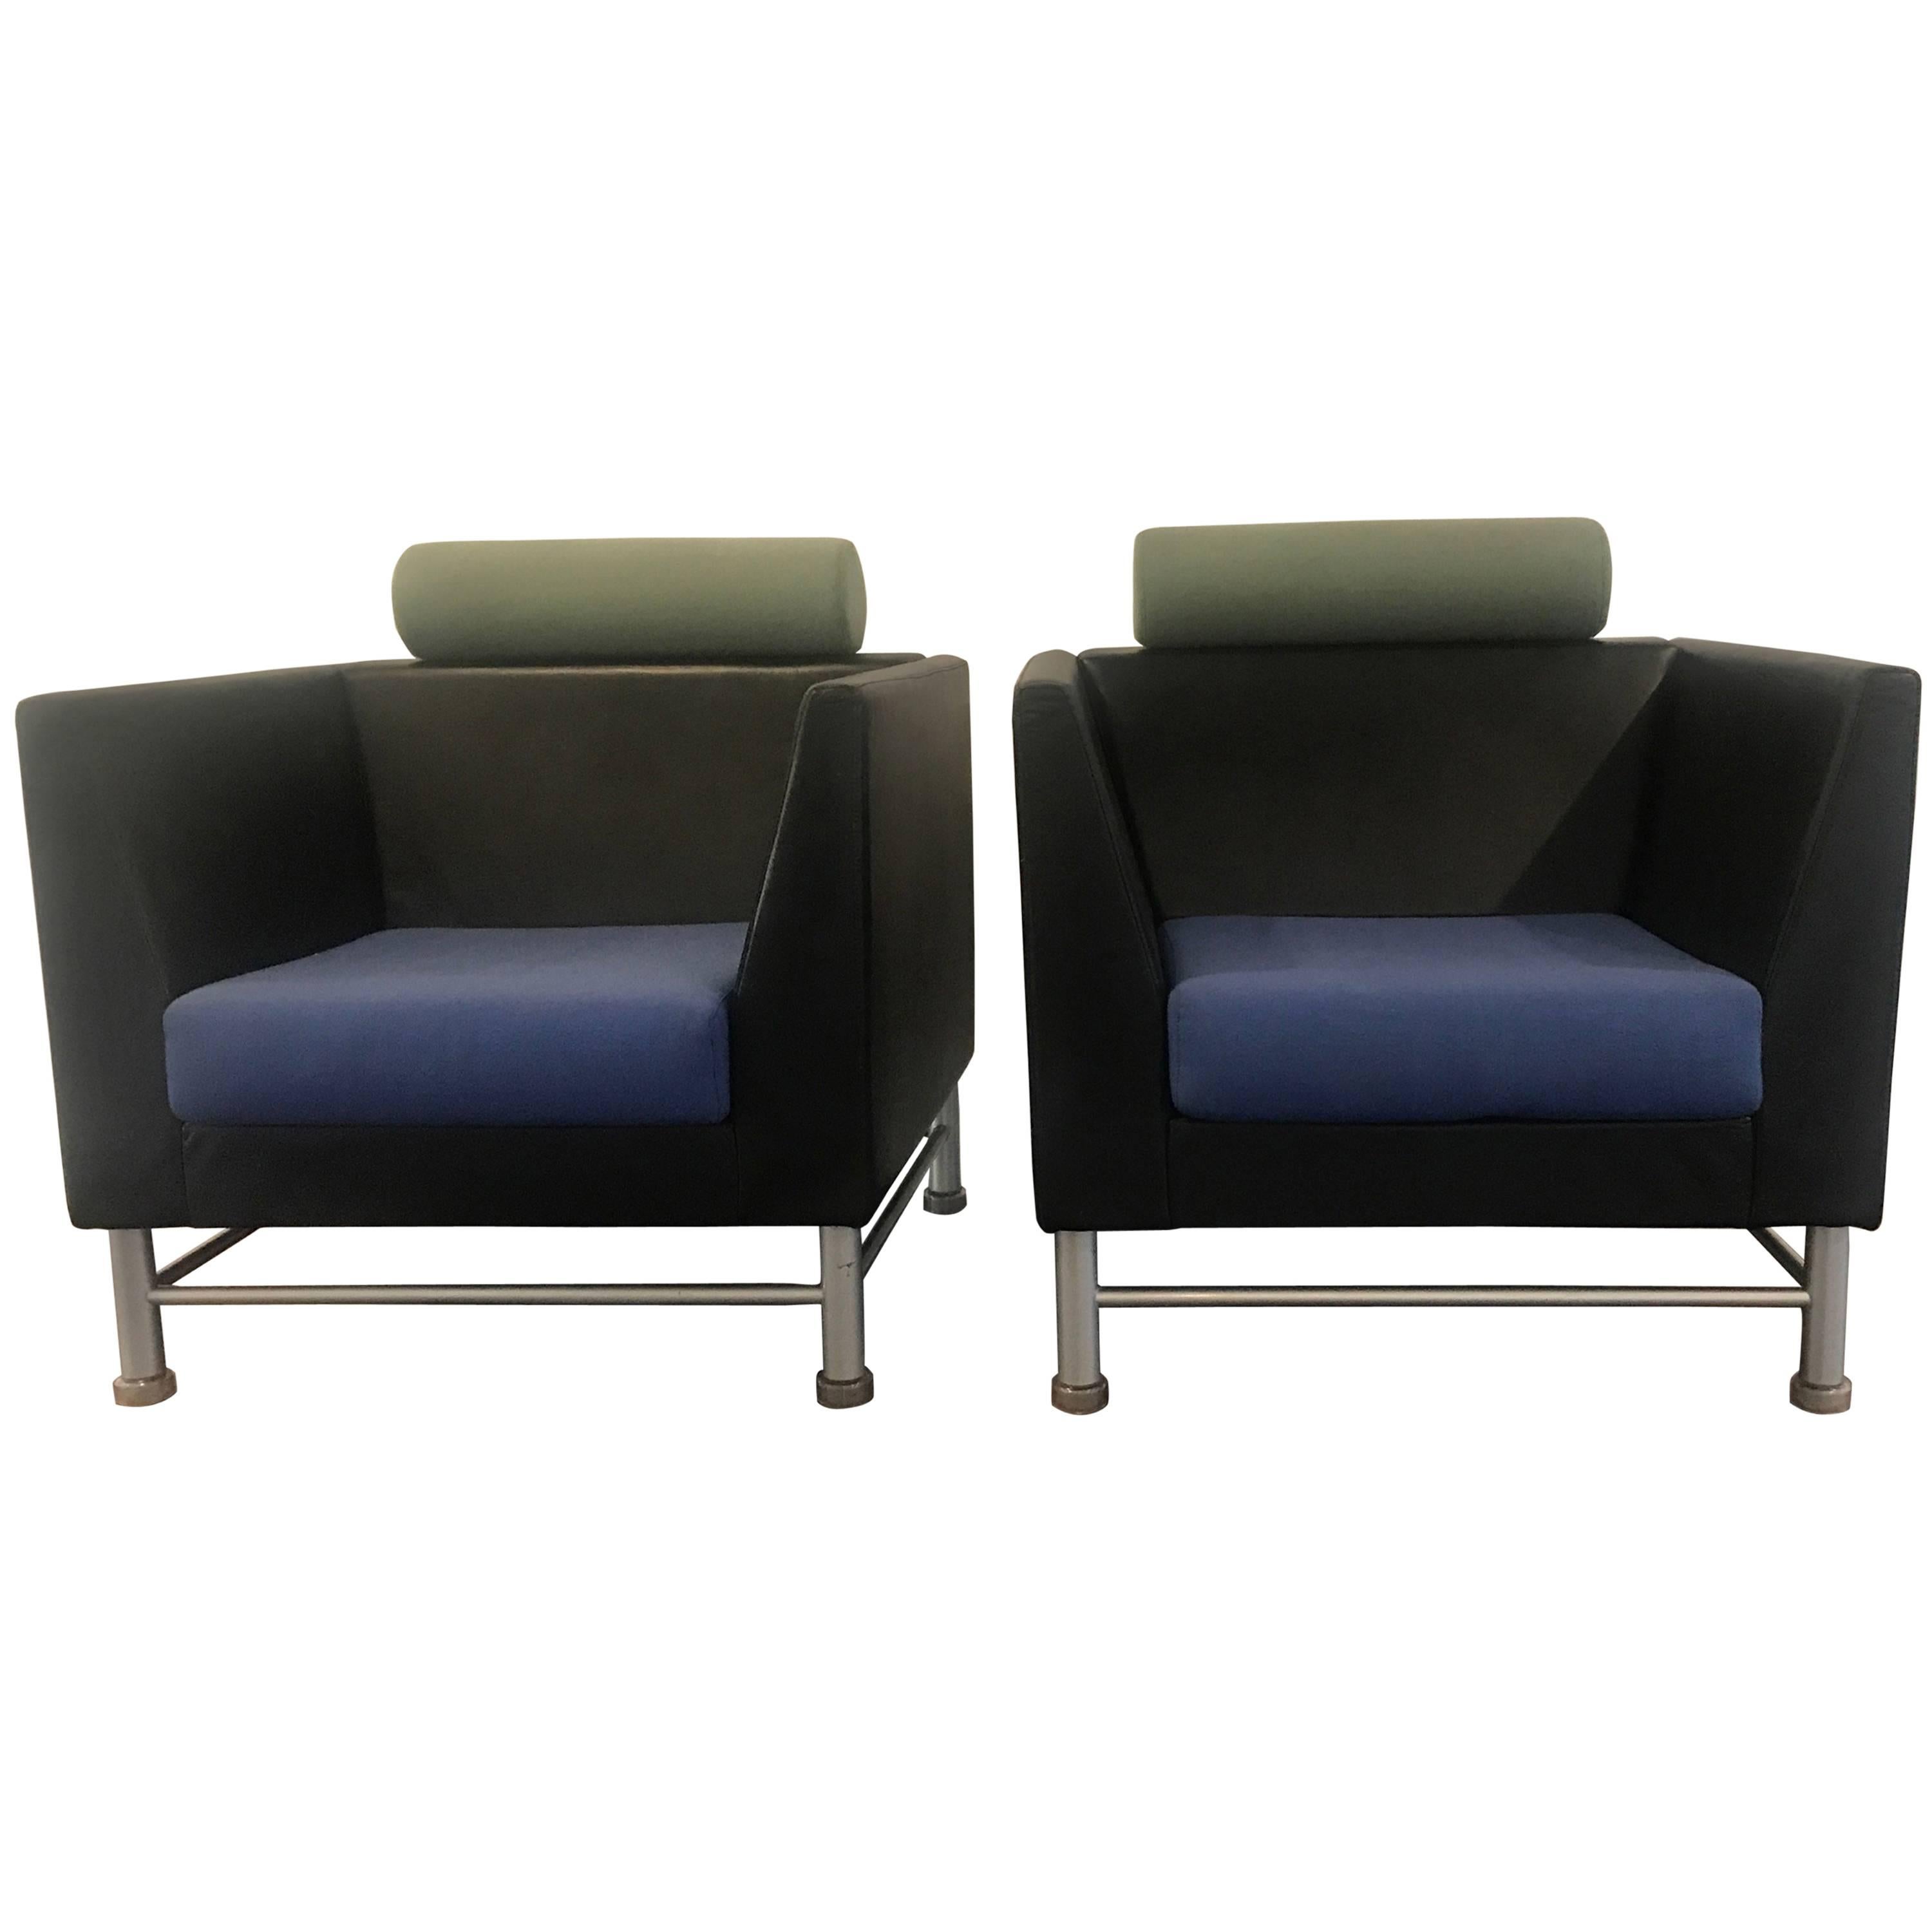 Ettore Sottsass Knoll East Side Chairs 1980s Leather